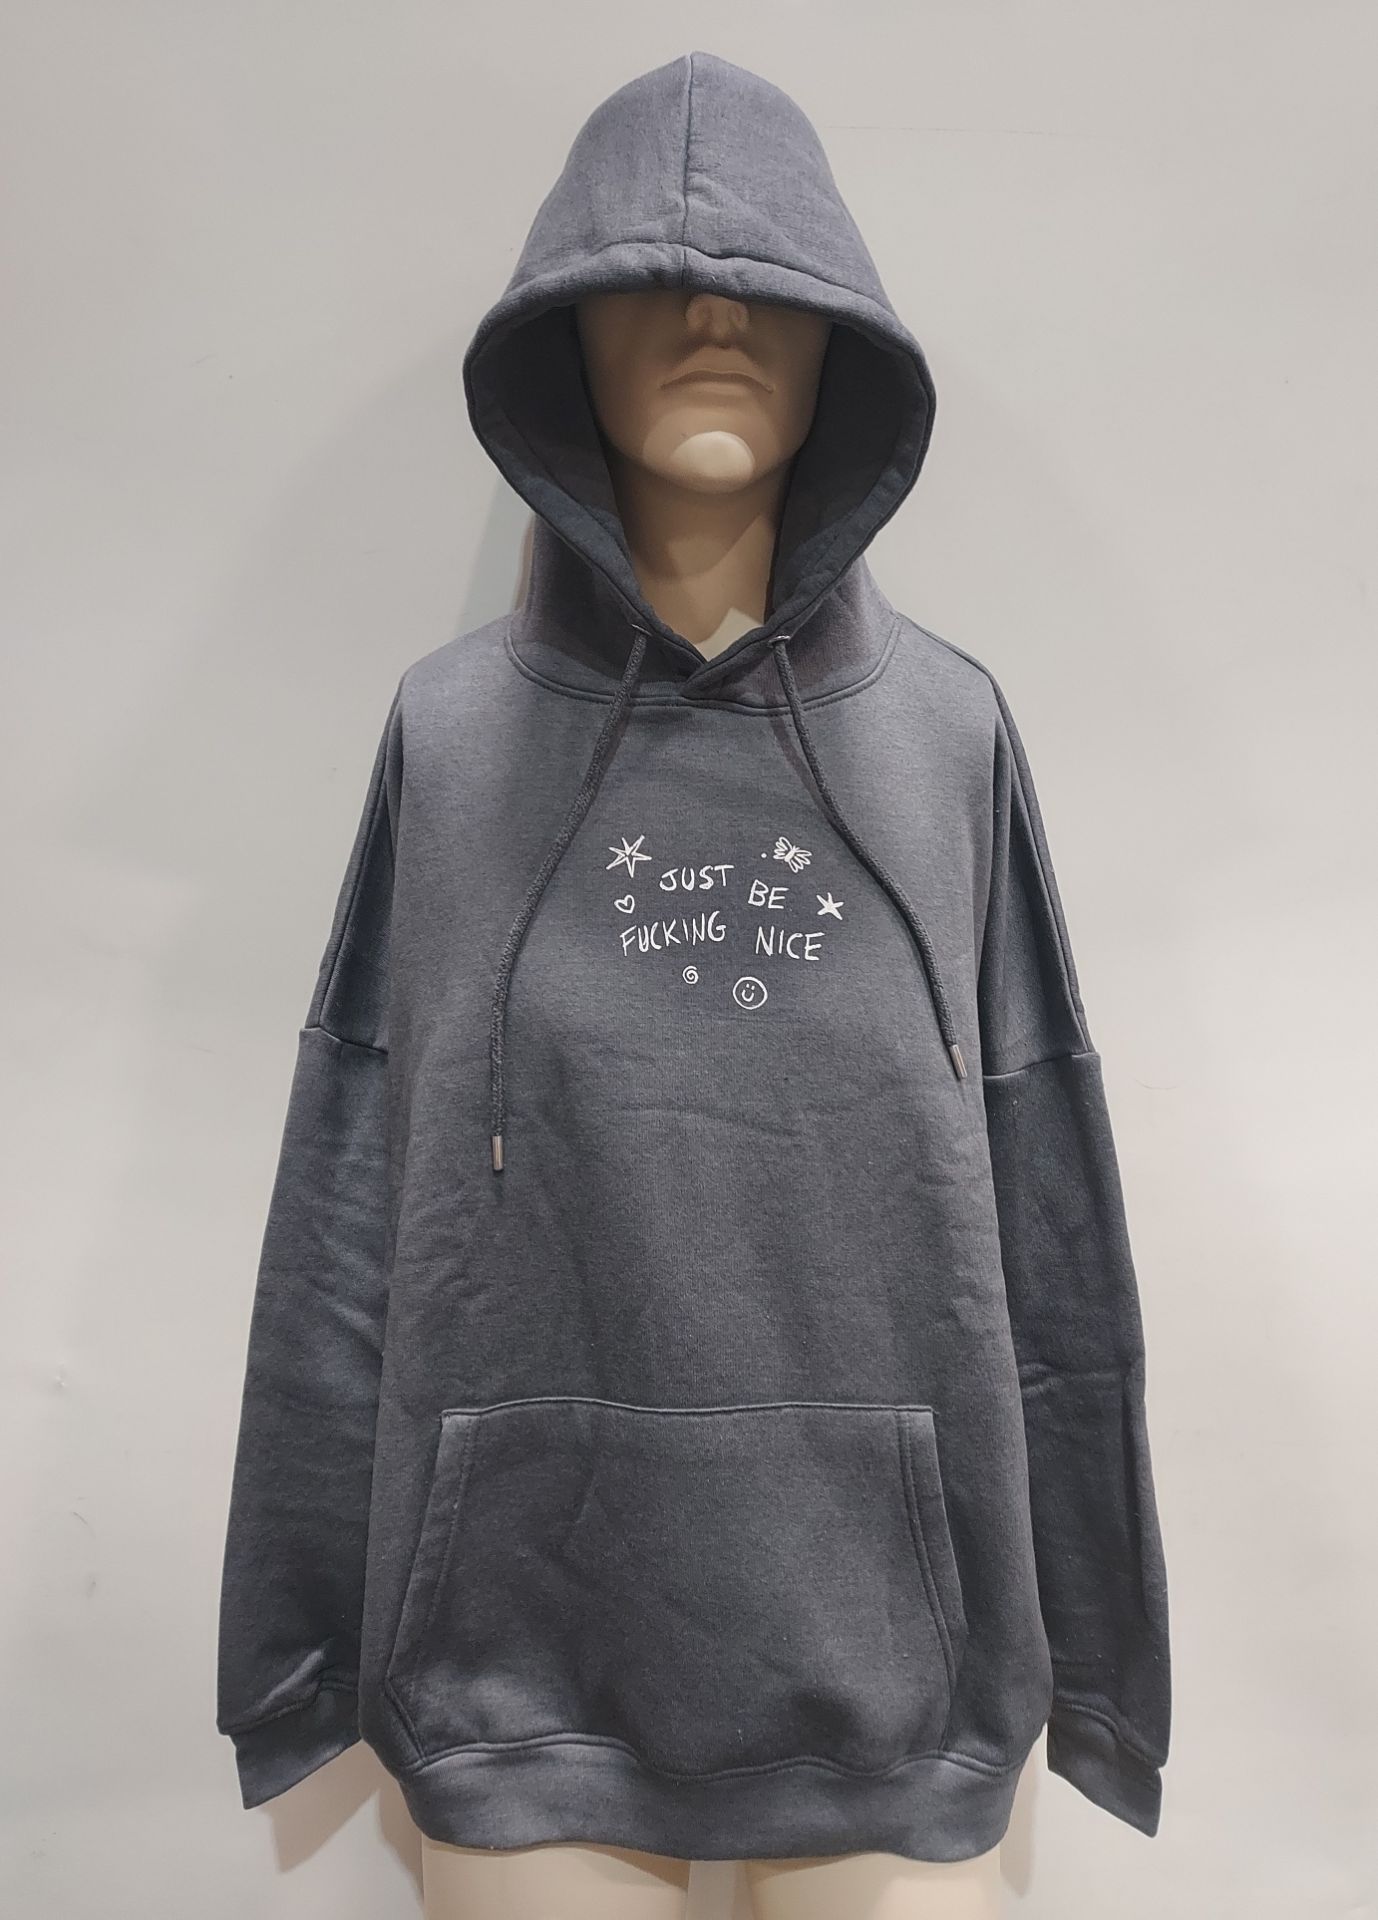 18 X BRAND NEW DAISY STREET HOODIES WITH JUST BE F#@#ING NICE IN CHARCOAL 16 IN SIZE LARGE , 2